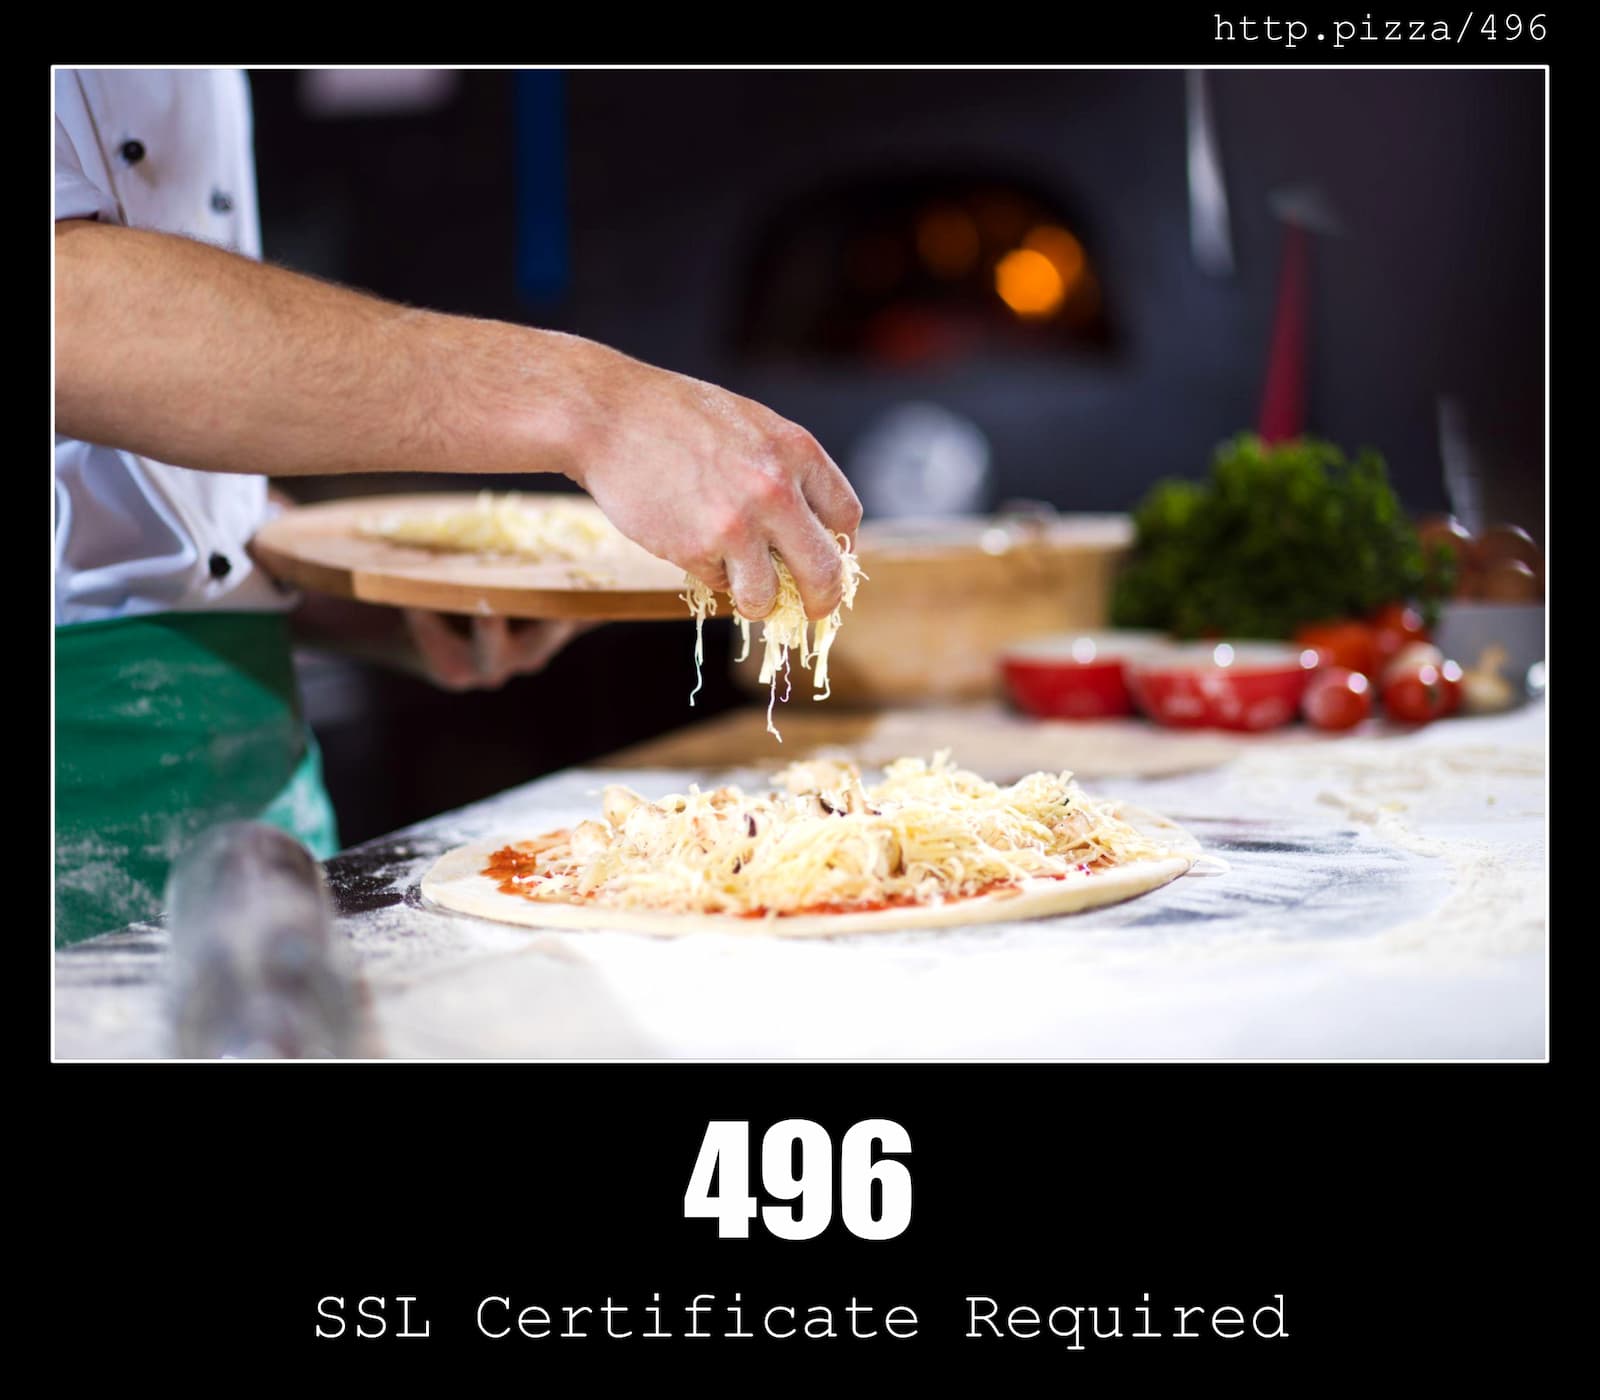 HTTP Status Code 496 SSL Certificate Required & Pizzas